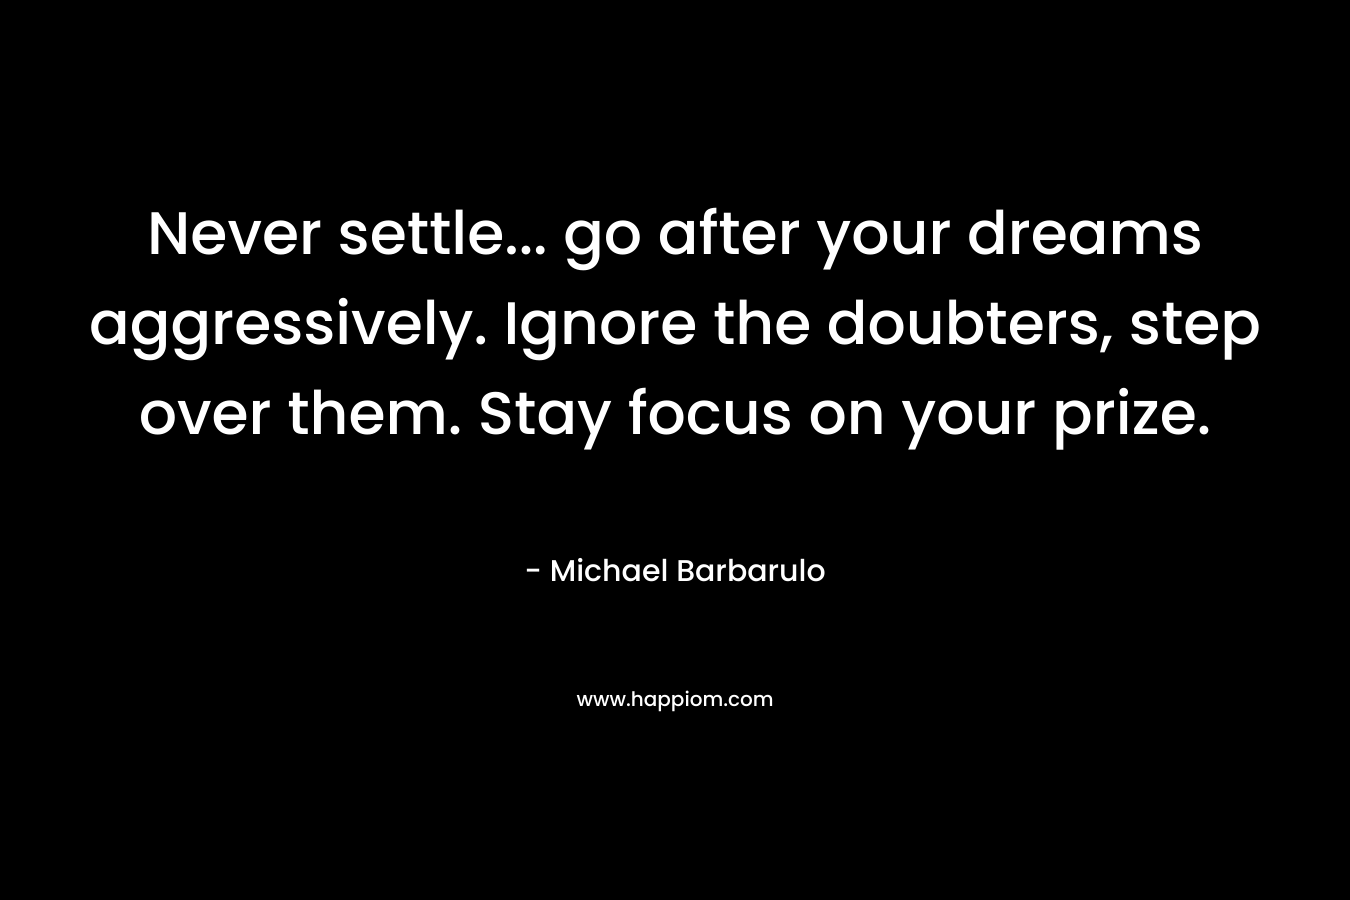 Never settle... go after your dreams aggressively. Ignore the doubters, step over them. Stay focus on your prize.